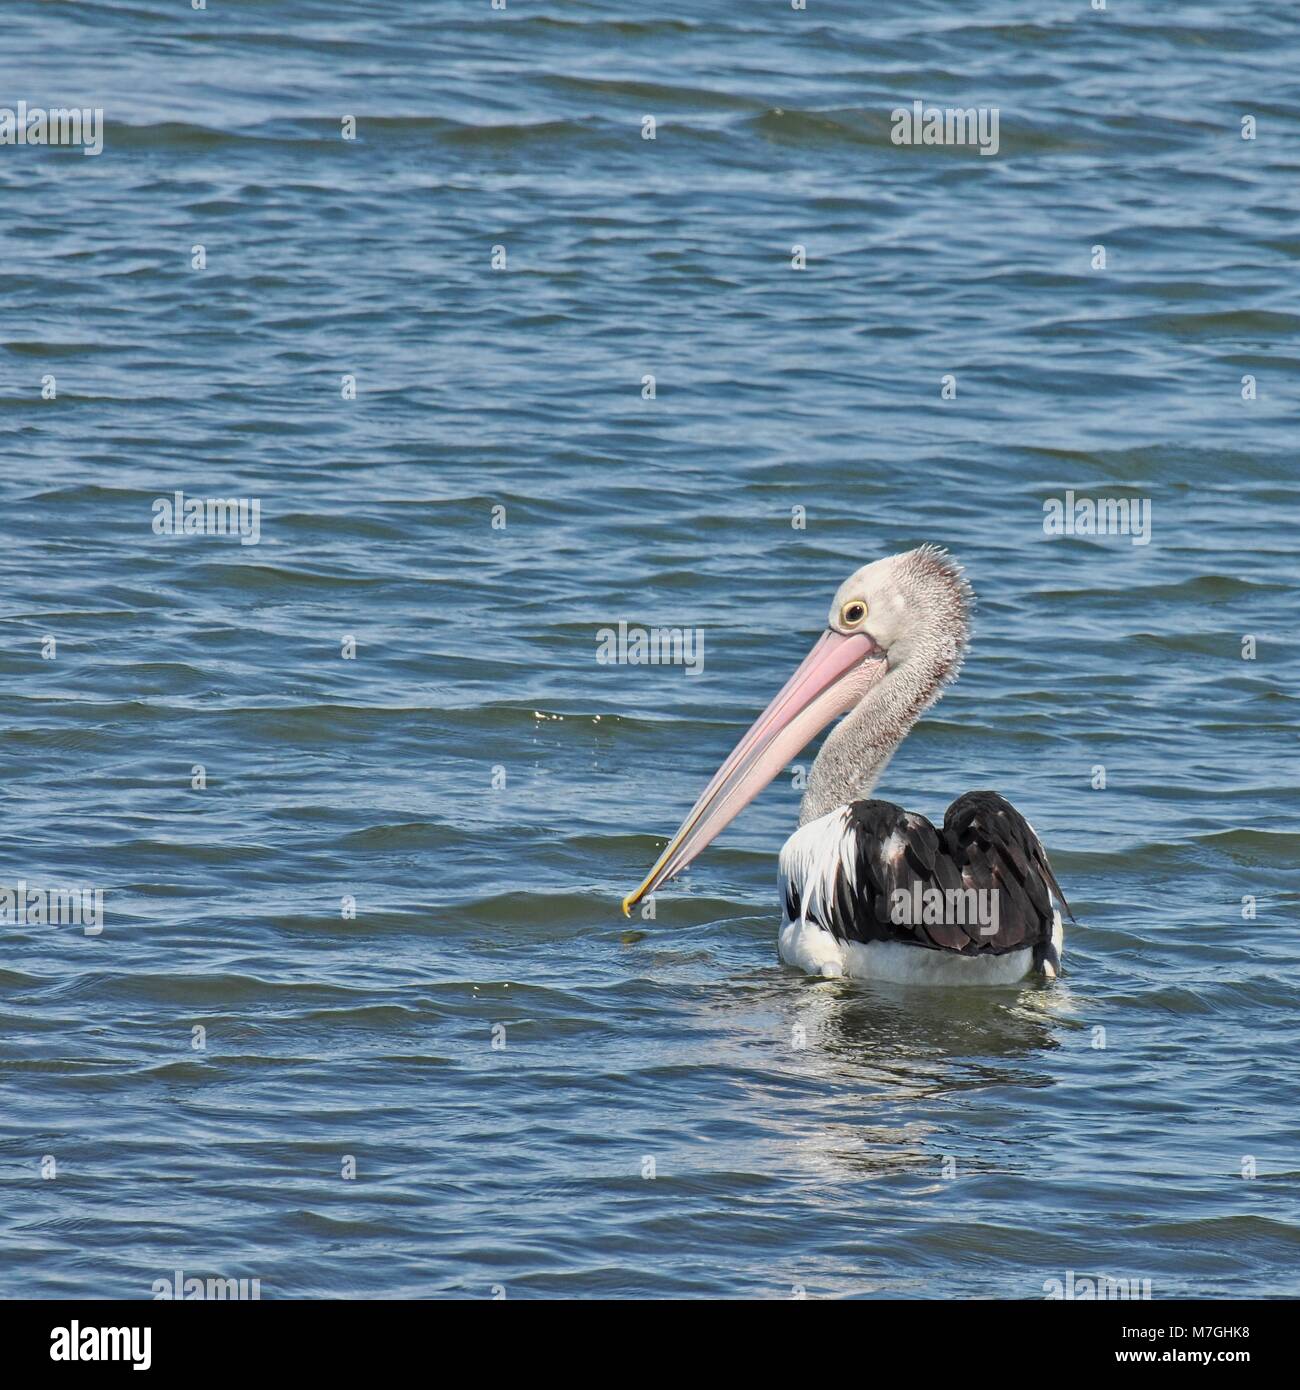 Australian Pelican on a section of water, moderate closeup. Square format. Stock Photo